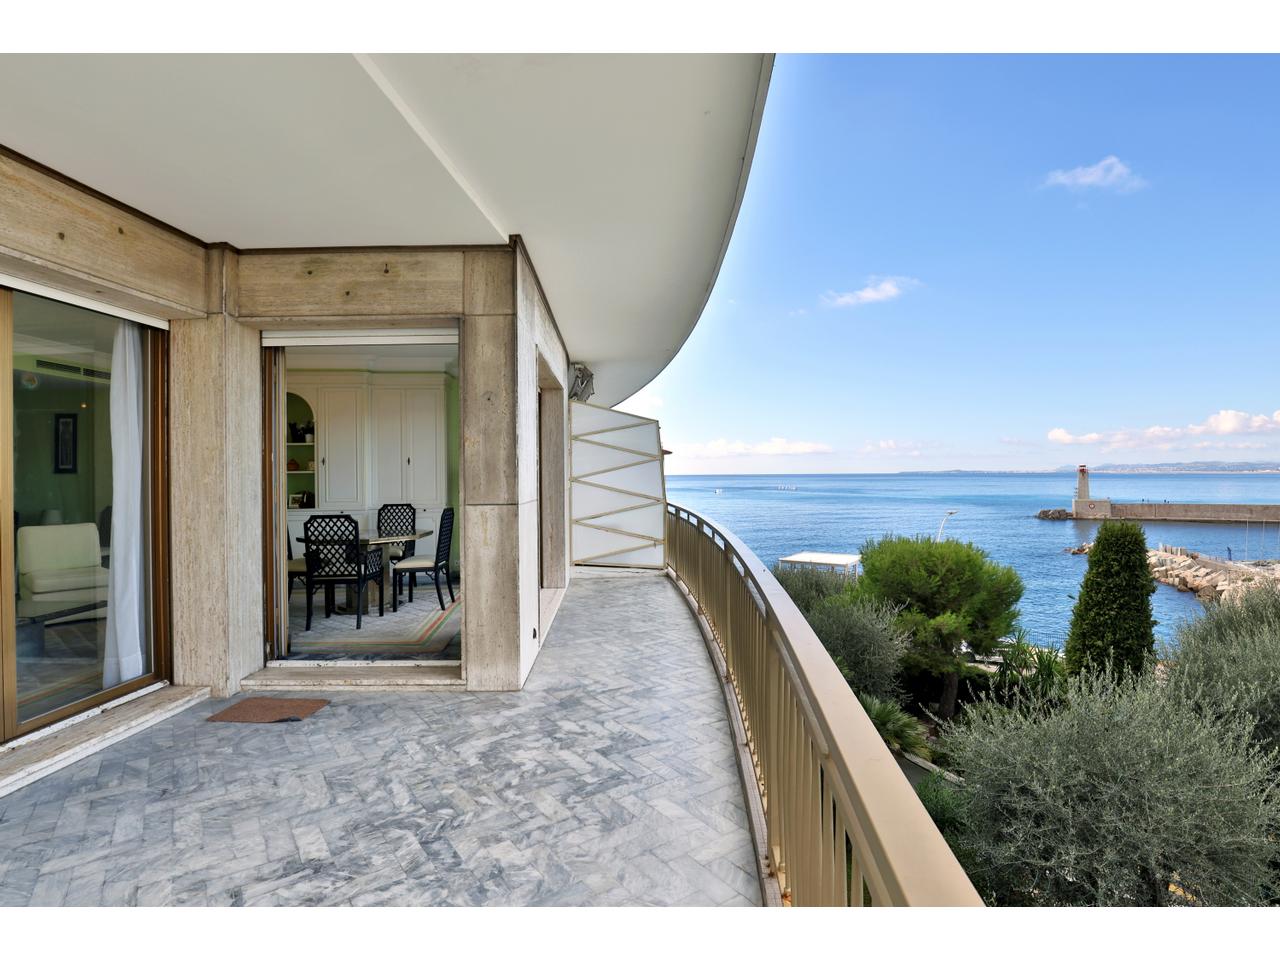 Nice Riviera - Agence Immobiliére Nice Côte d'Azur | Appartement  3 Rooms 94.16m2  for sale  1 500 000 €